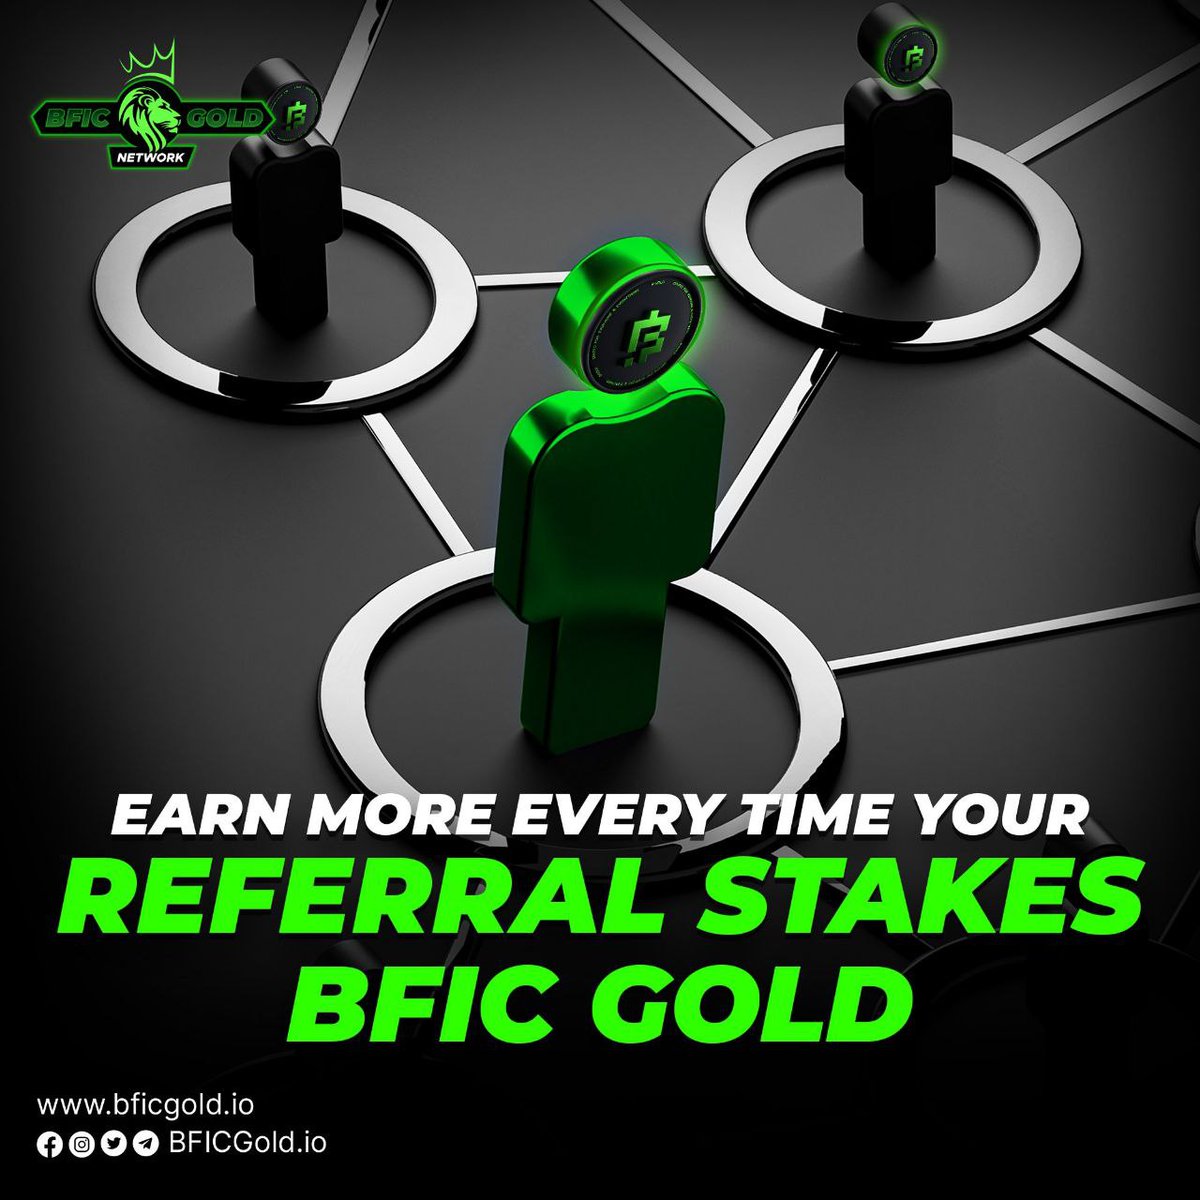 Unlock unlimited earnings with BFIC Gold! 🌟

Refer a friend, and earn more every time they stake BFIC Gold. 

Your network, your wealth – it's that simple! 💰

#Bgold #innovationClub #bficoin #BficGold #BficGoldNetwork